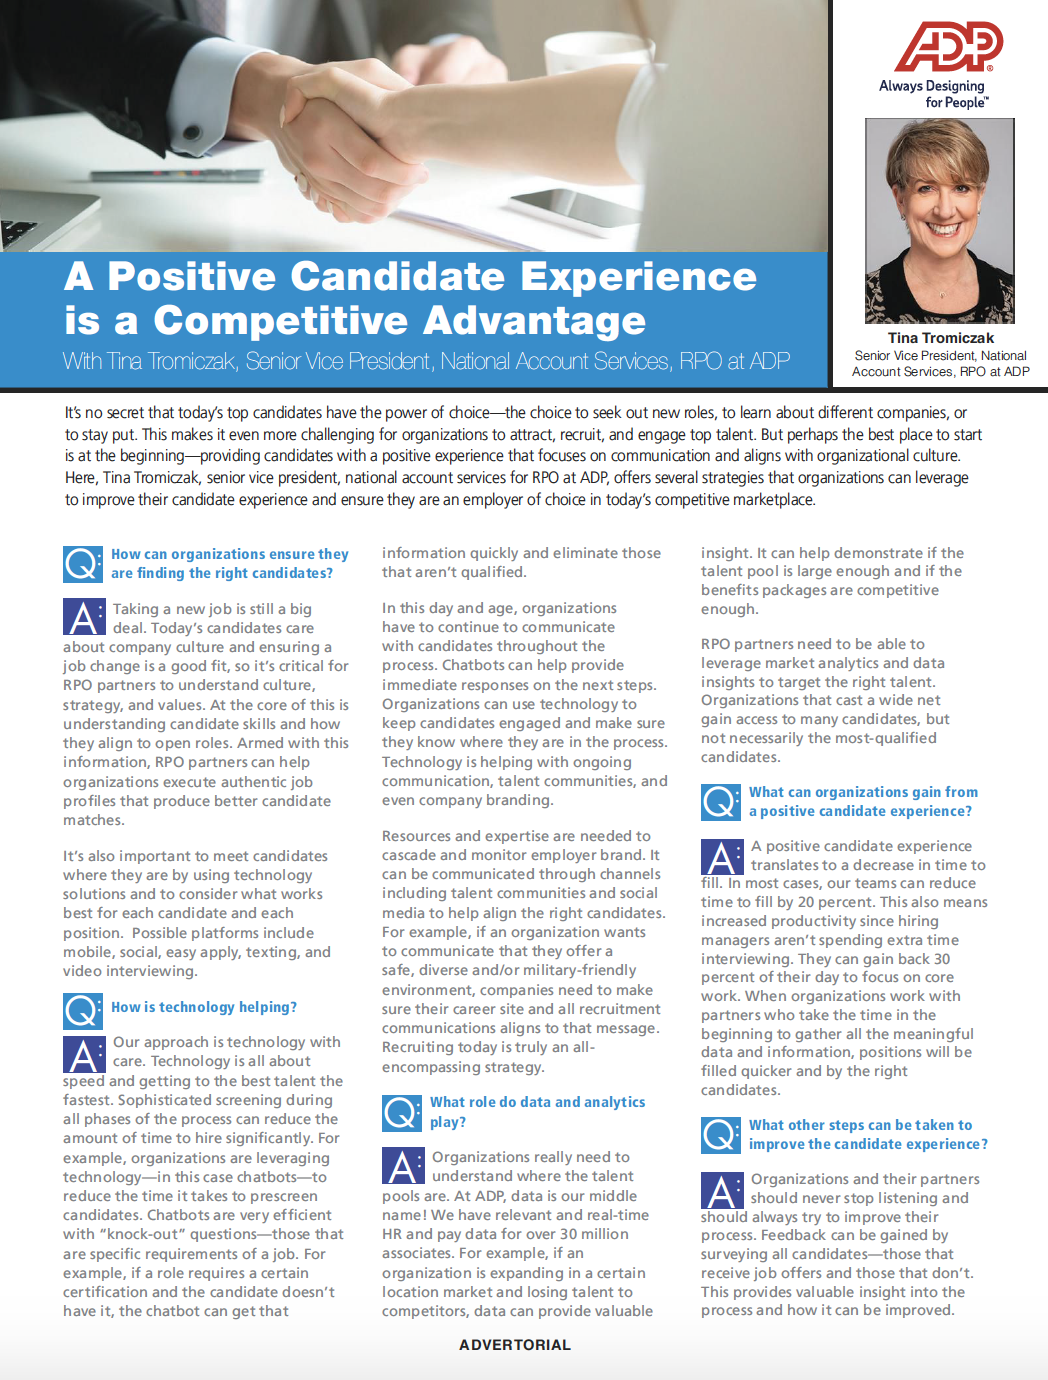 Positive Candidate Experience